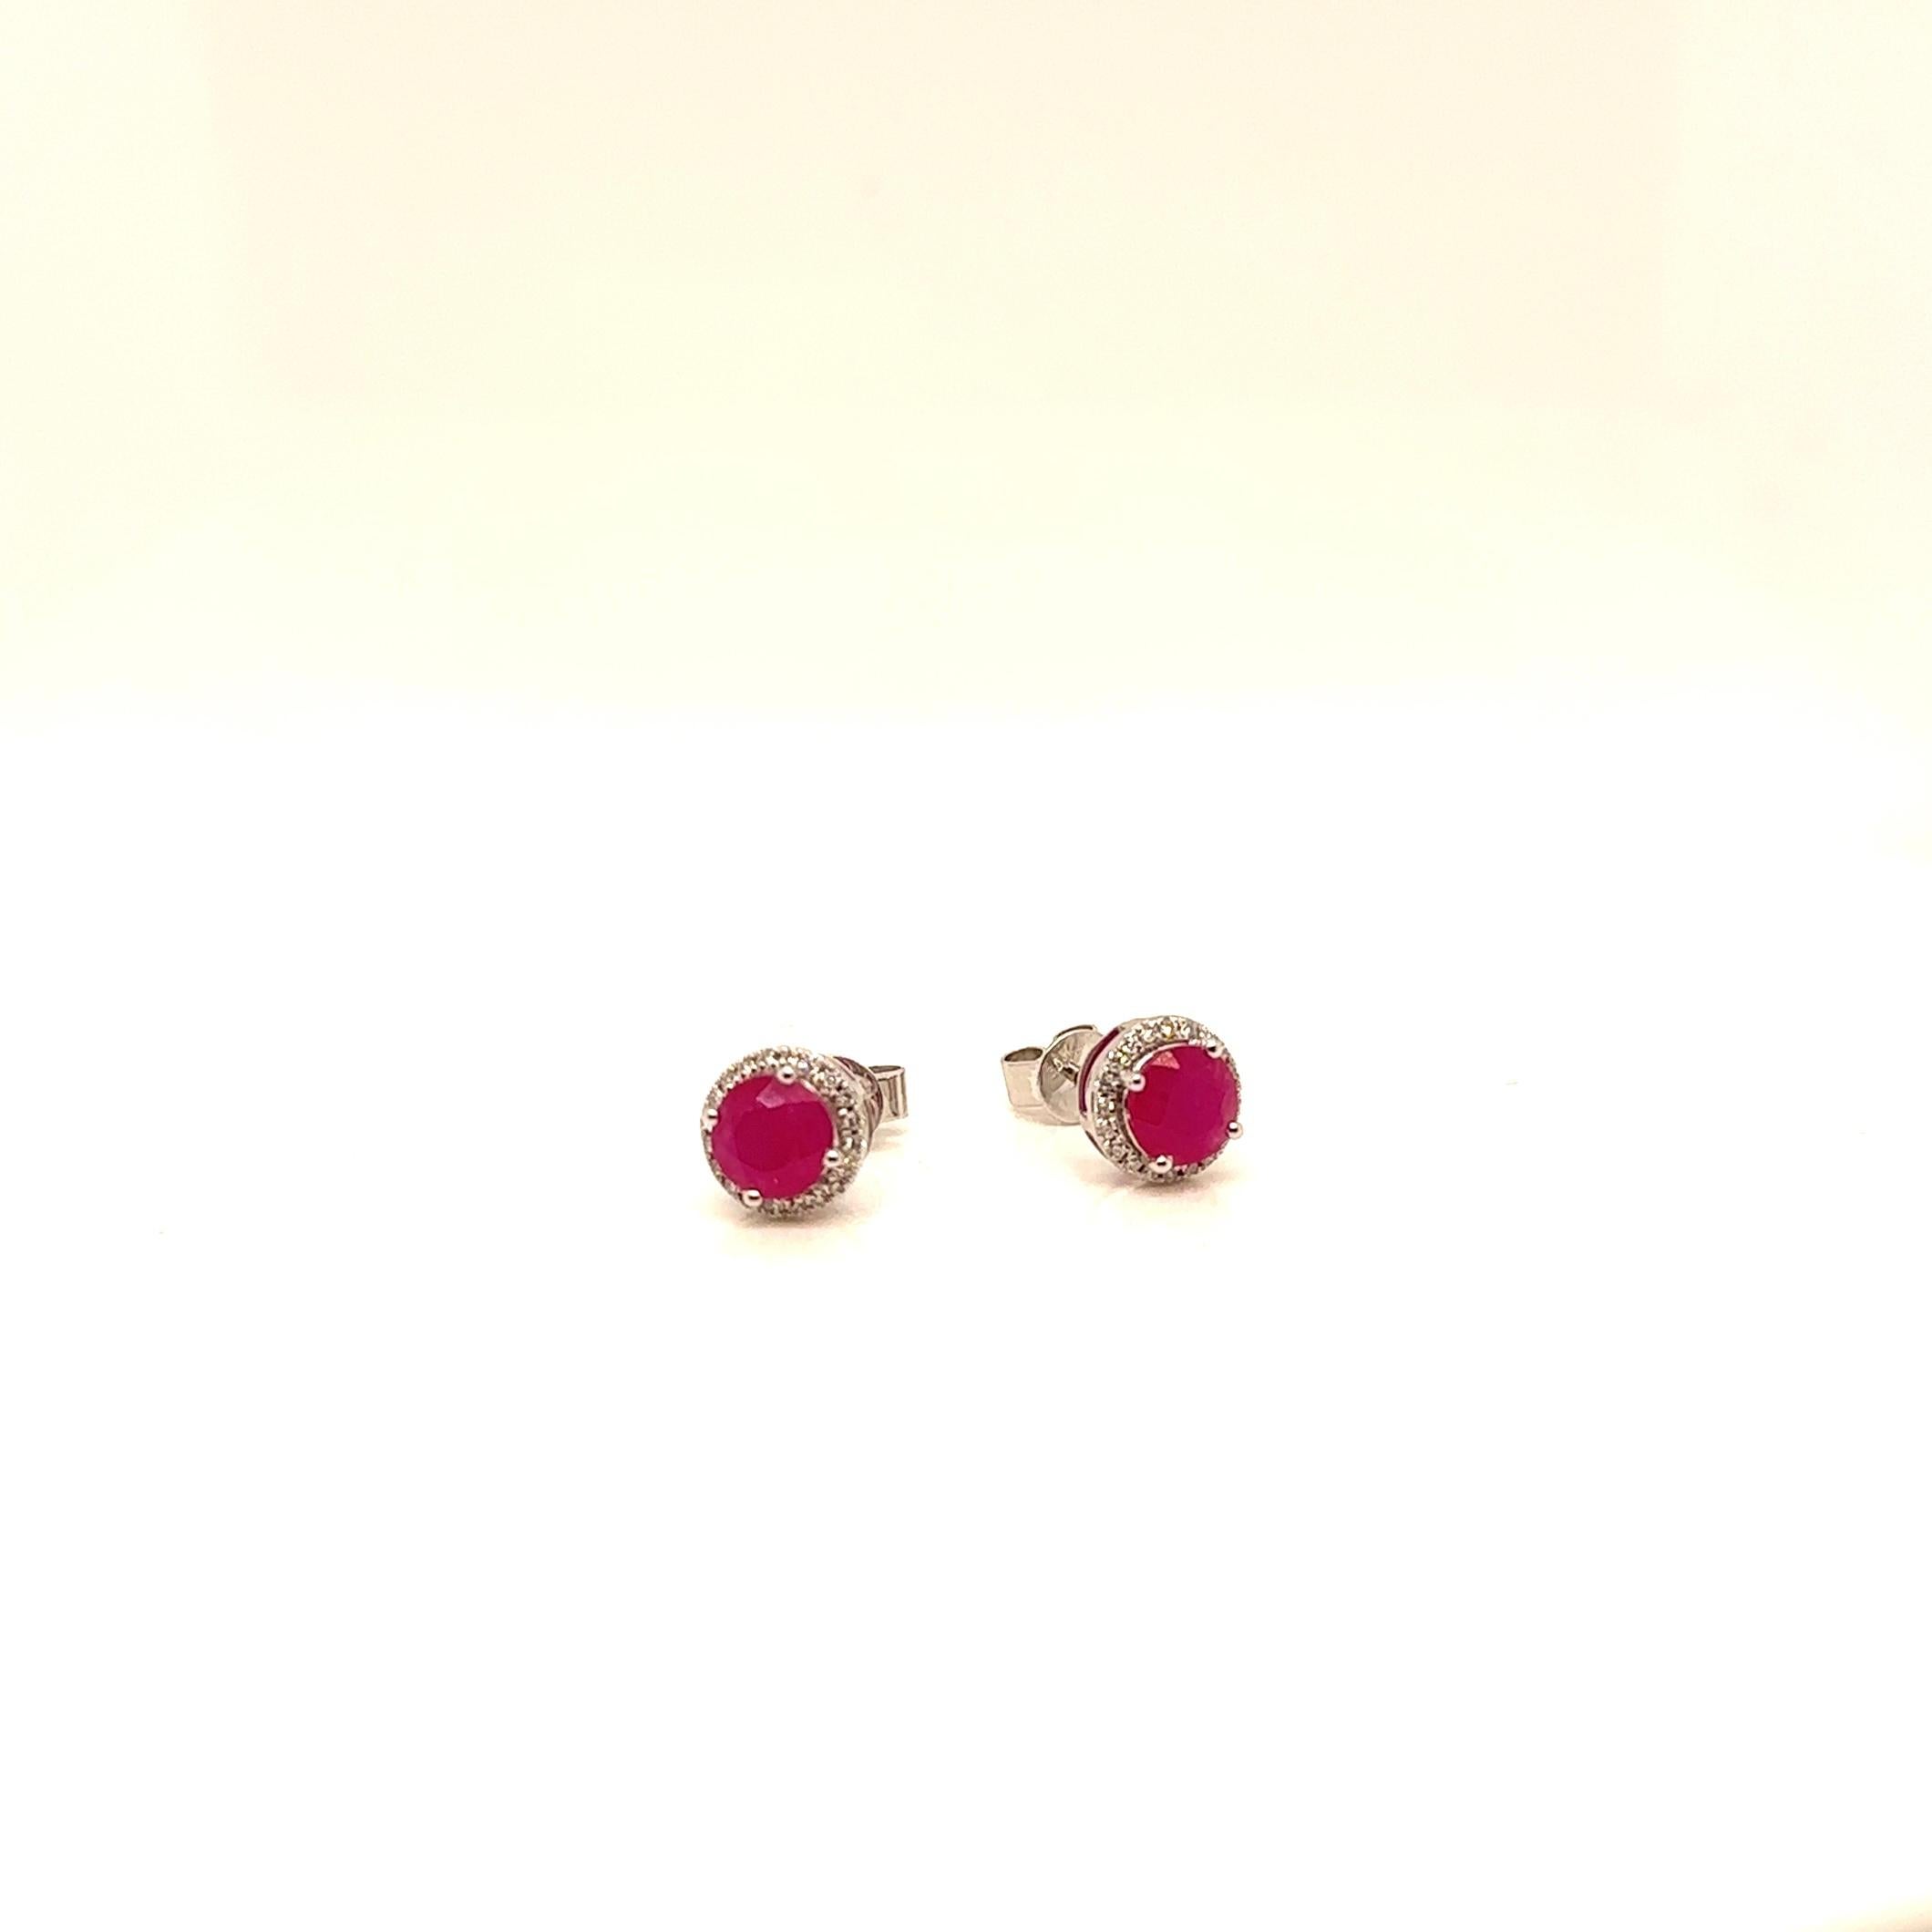 Round Cut 6MM Rd, Ruby Diamond set in 14K White Gold Earrings For Sale